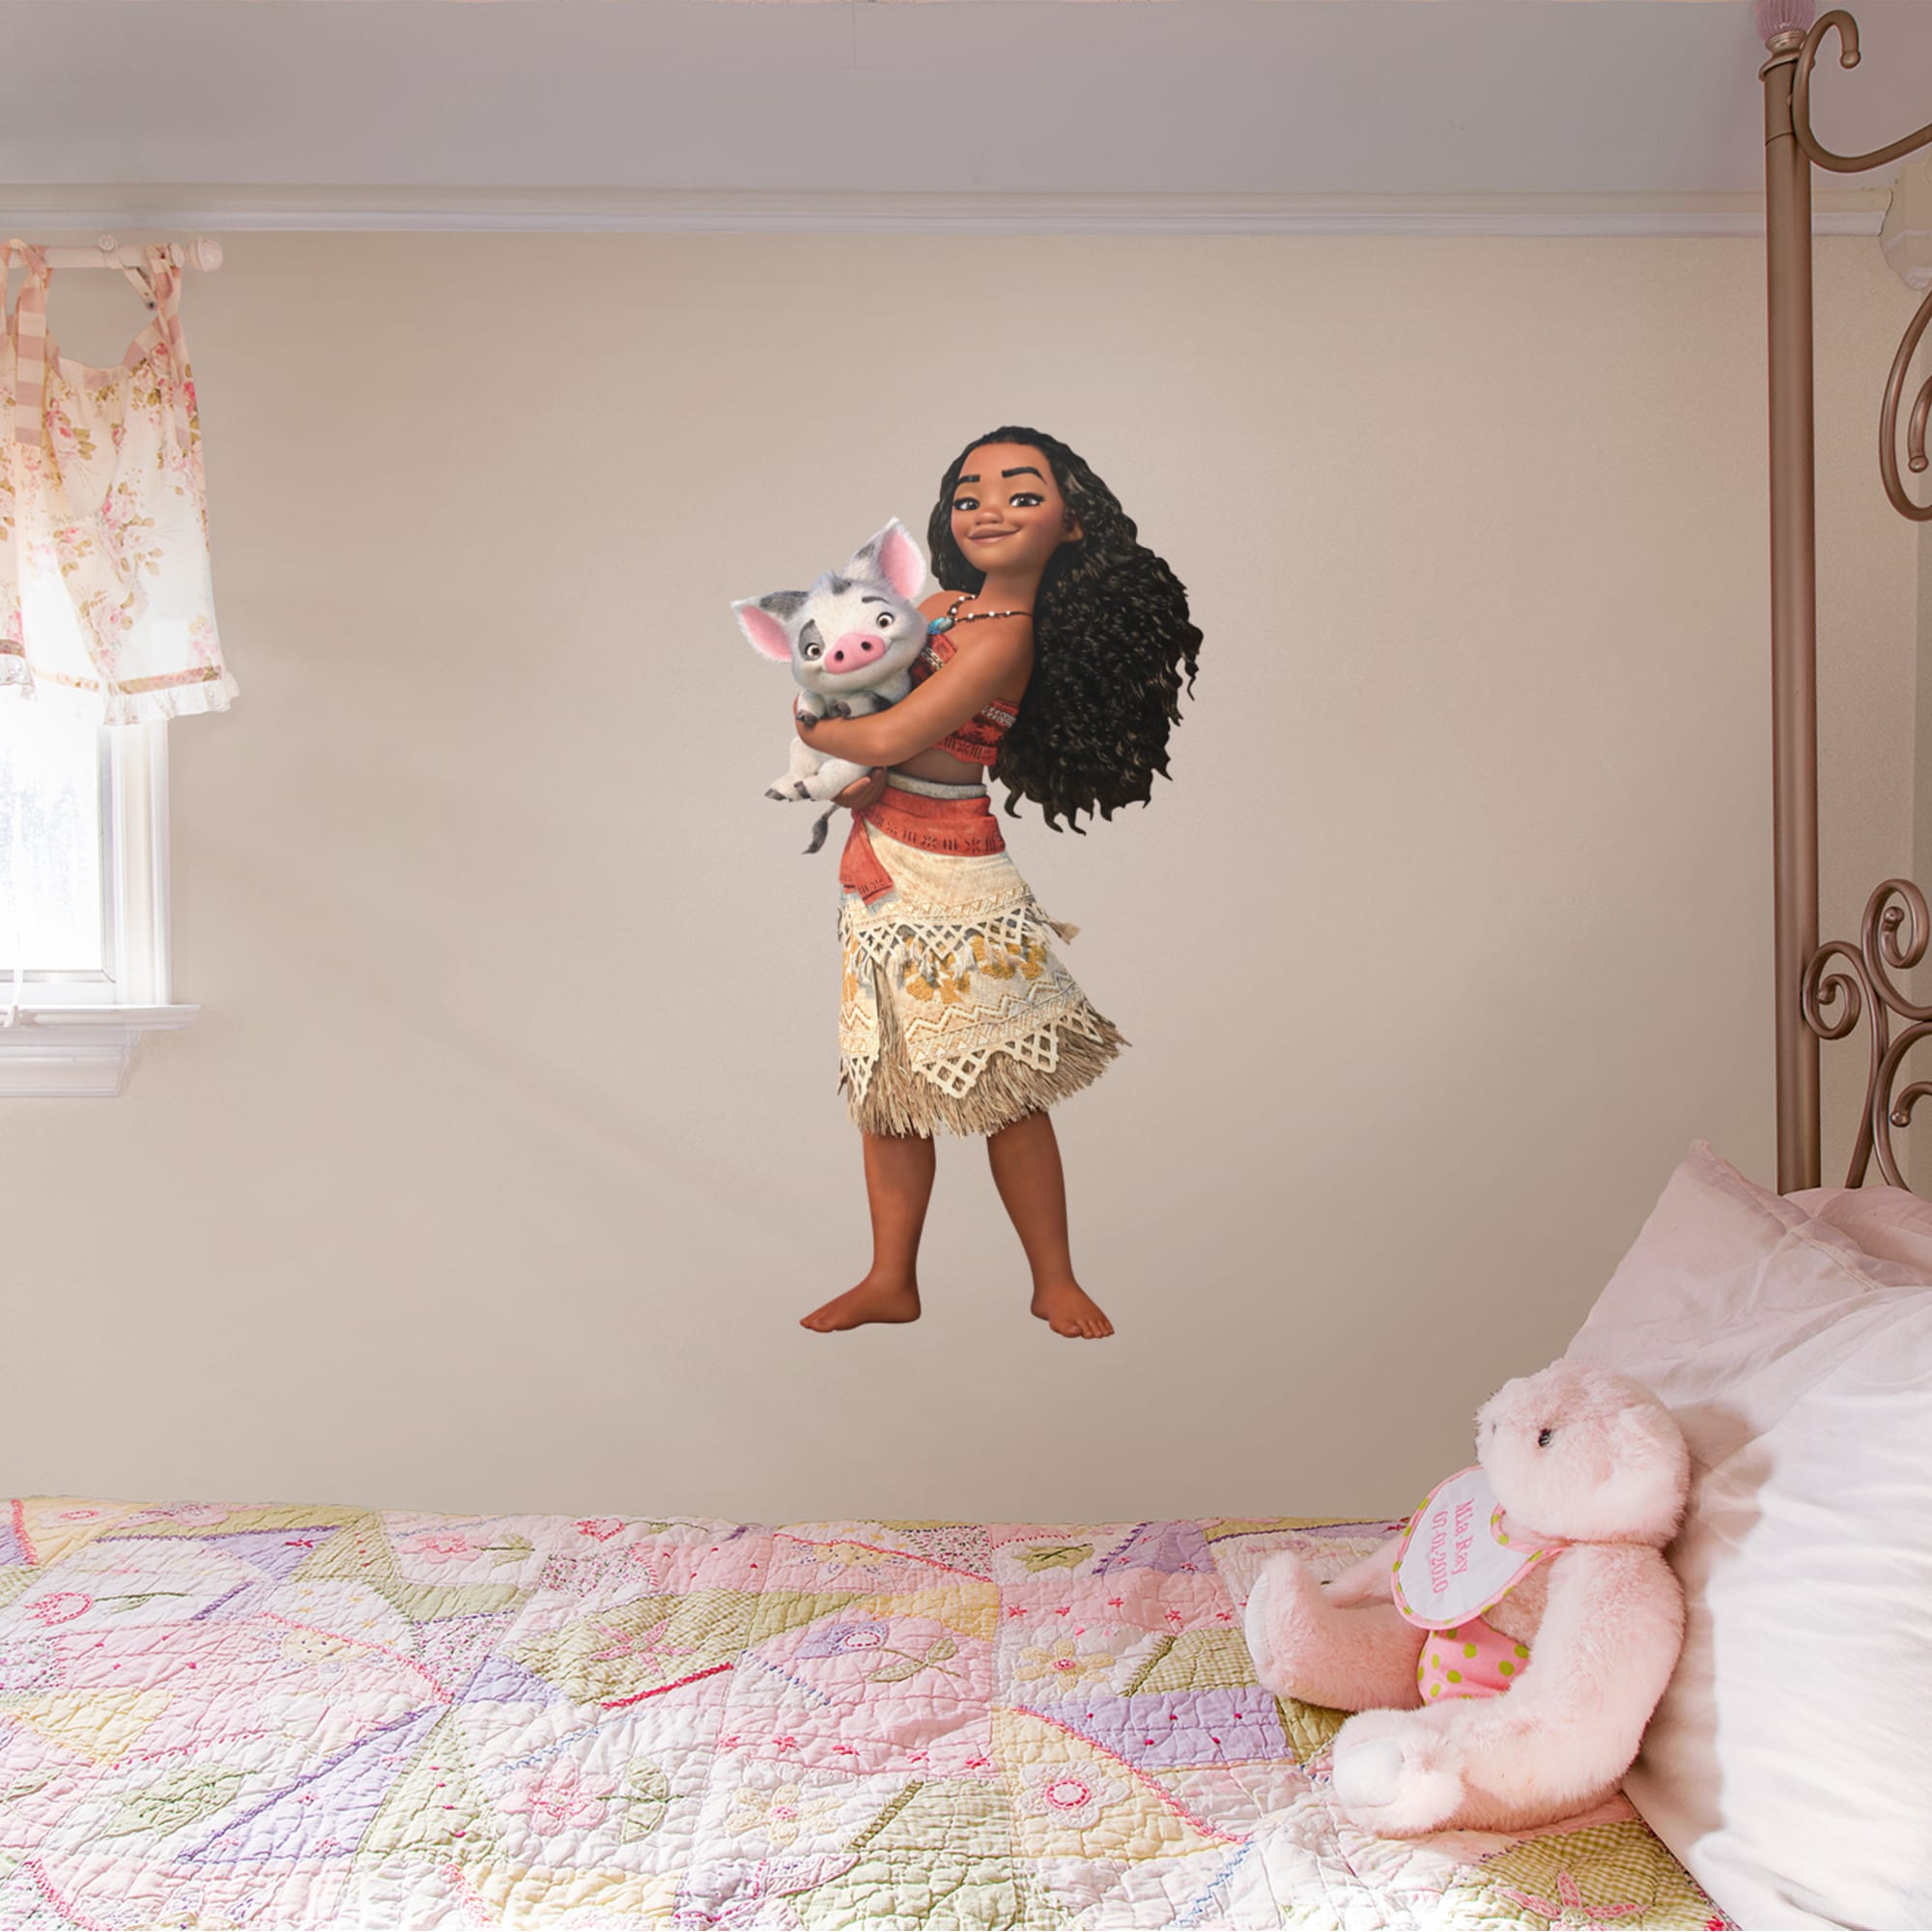 Moana - Officially Licensed Disney Removable Wall Decal 20.0"W x 39.0"H by Fathead | Vinyl